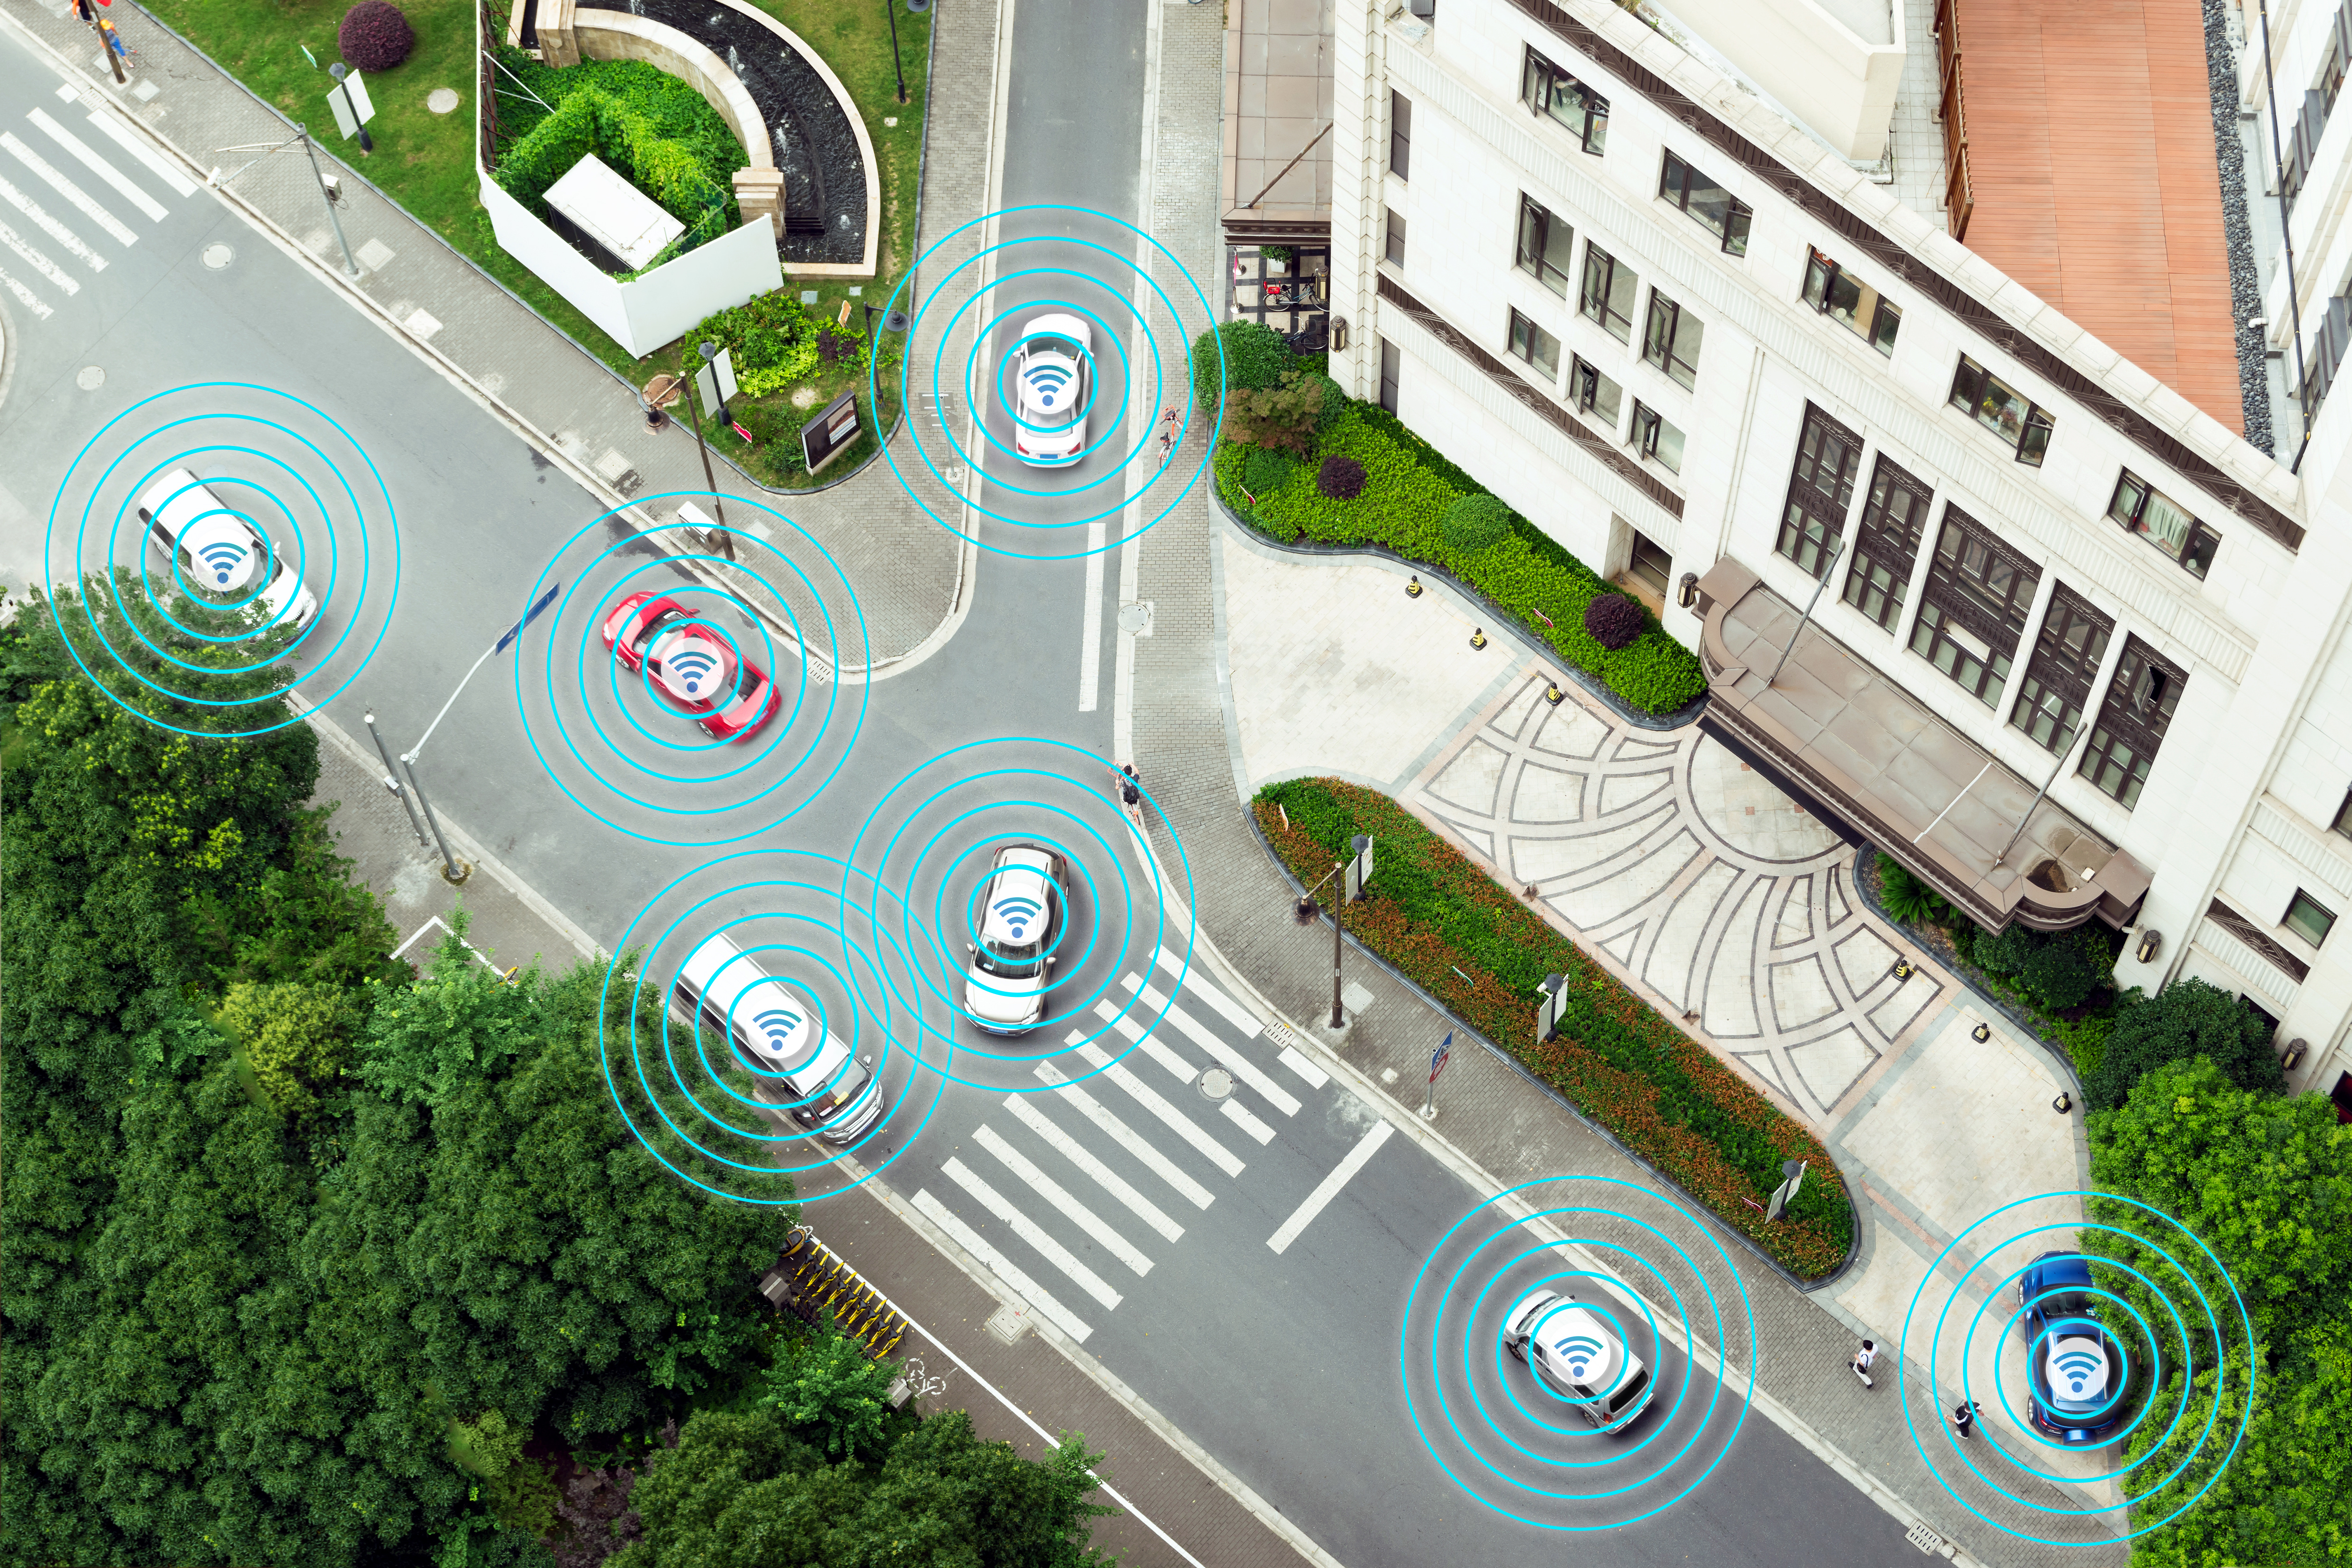 Connected cars transmitting data on street